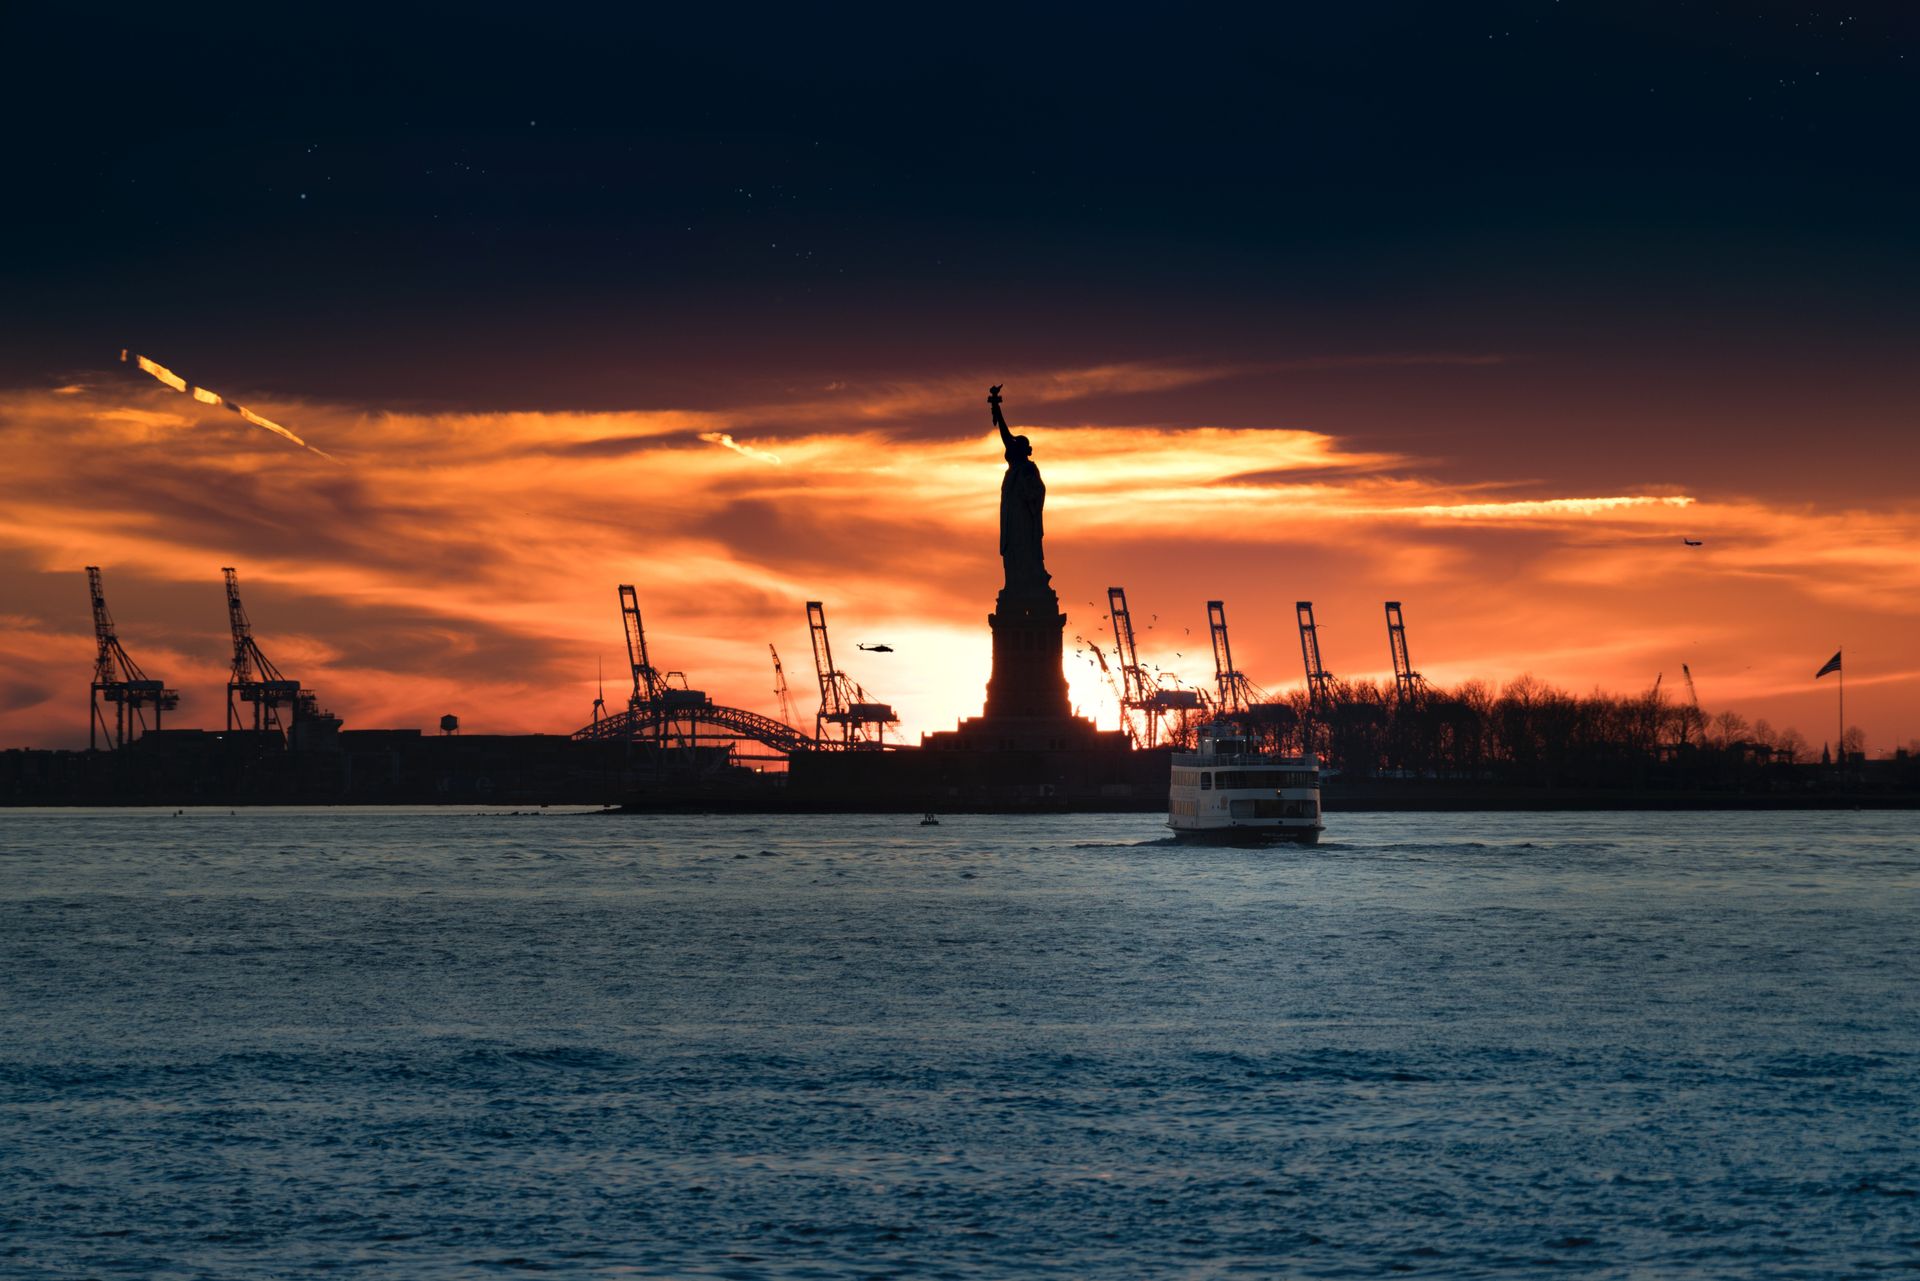 statue of liberty on a beautiful sunset surrounded by the large micro excavator on the gold coast